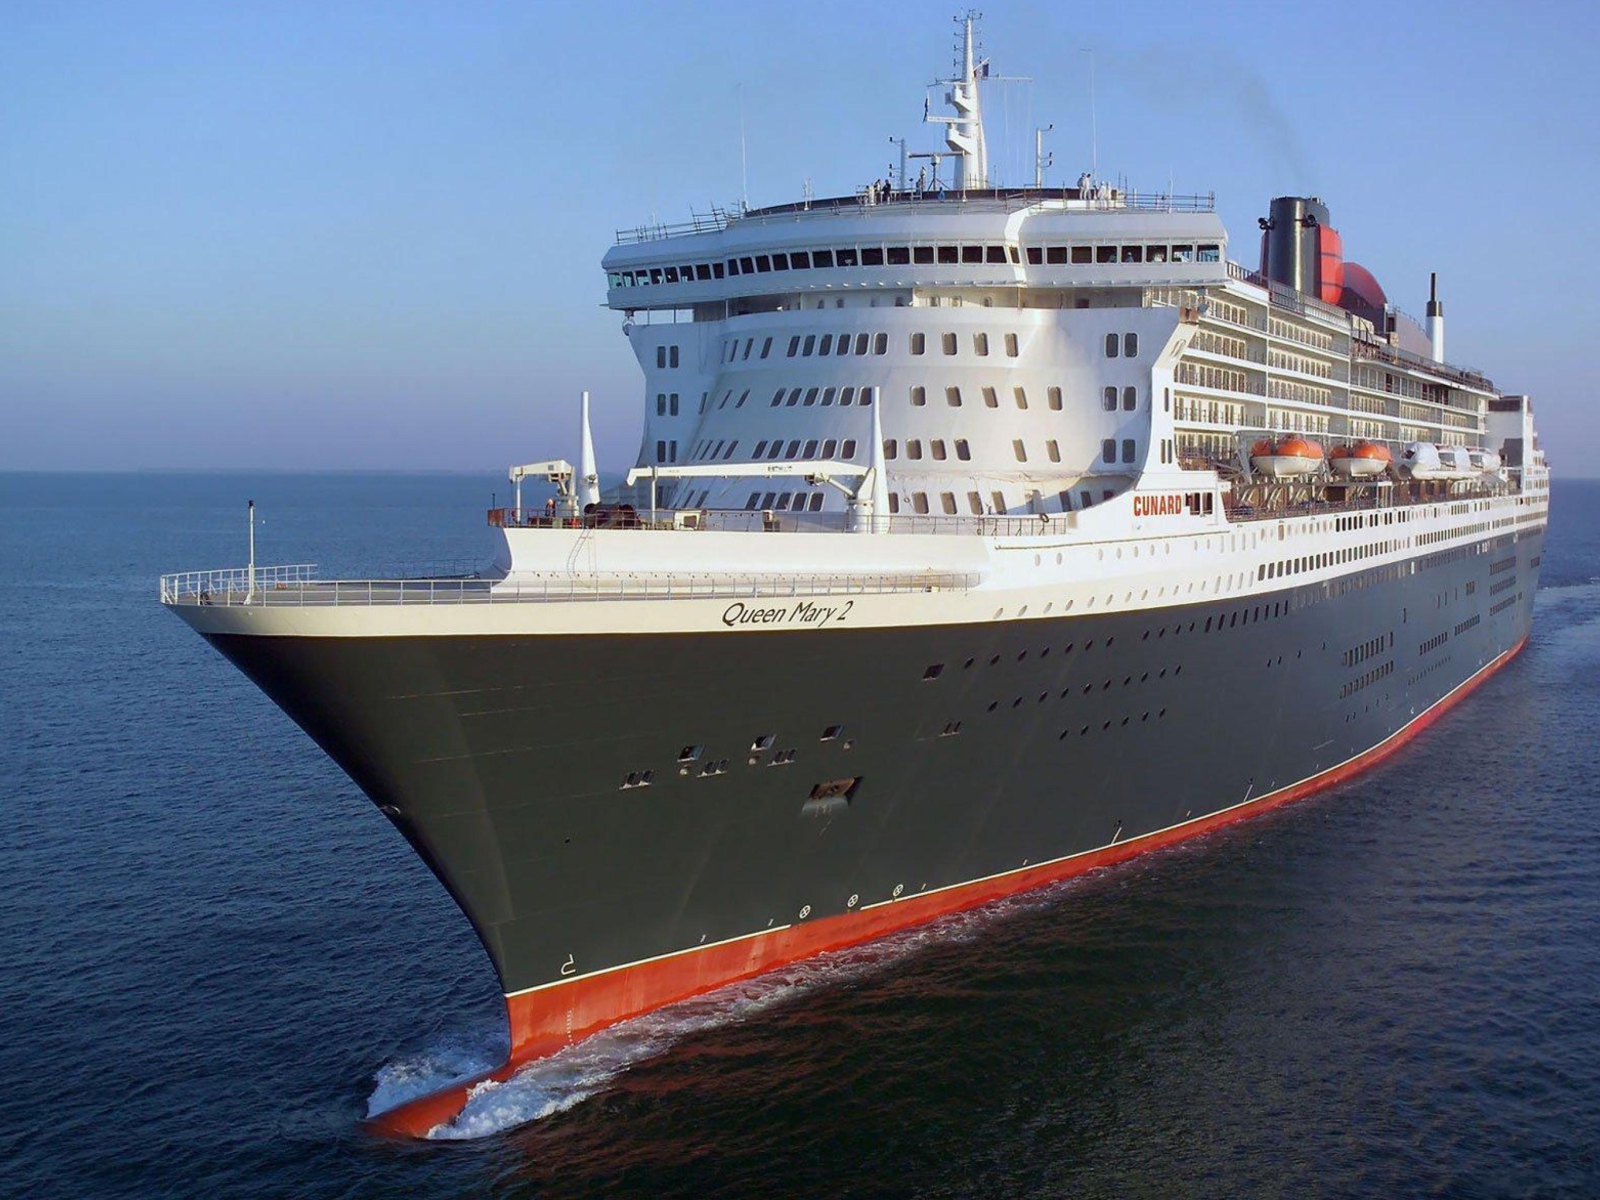 Queen Mary 2 - Flagship wallpaper 1600x1200